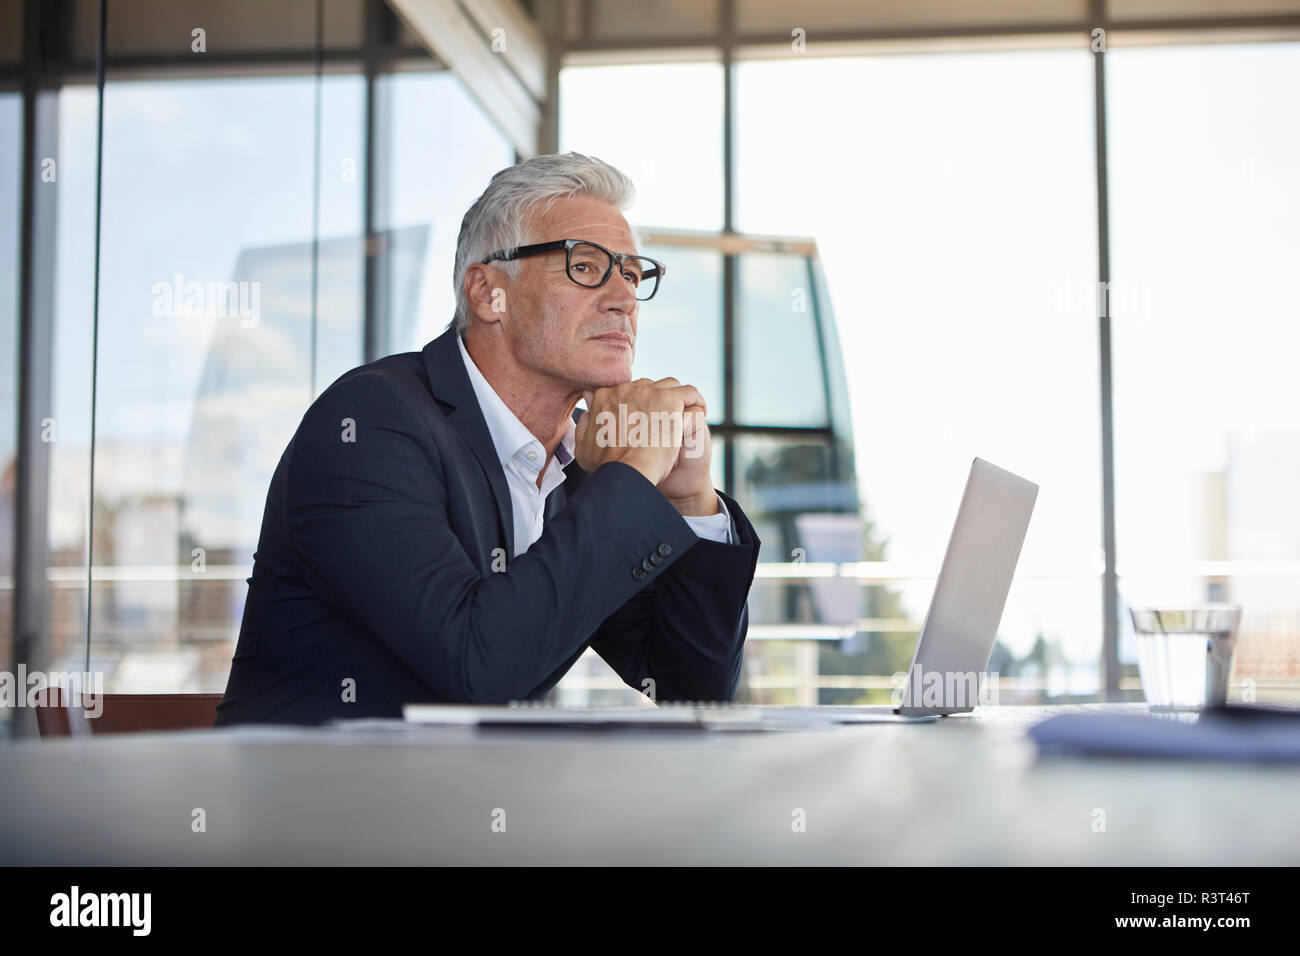 Businessman sitting in office, thinking Stock Photo